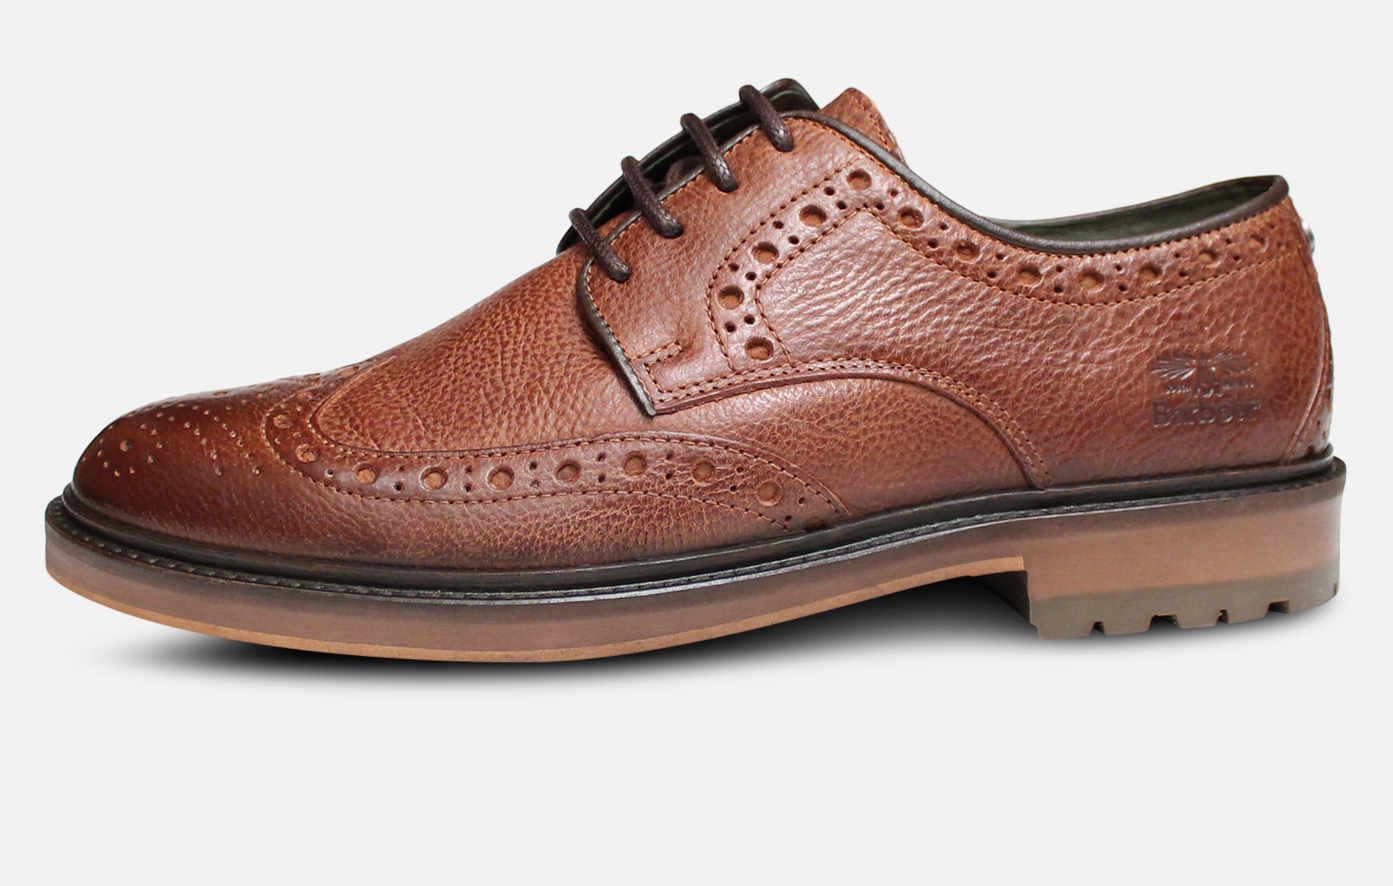 Barbour Mens Lace Up Ouse Country Brogue Shoes in Tan